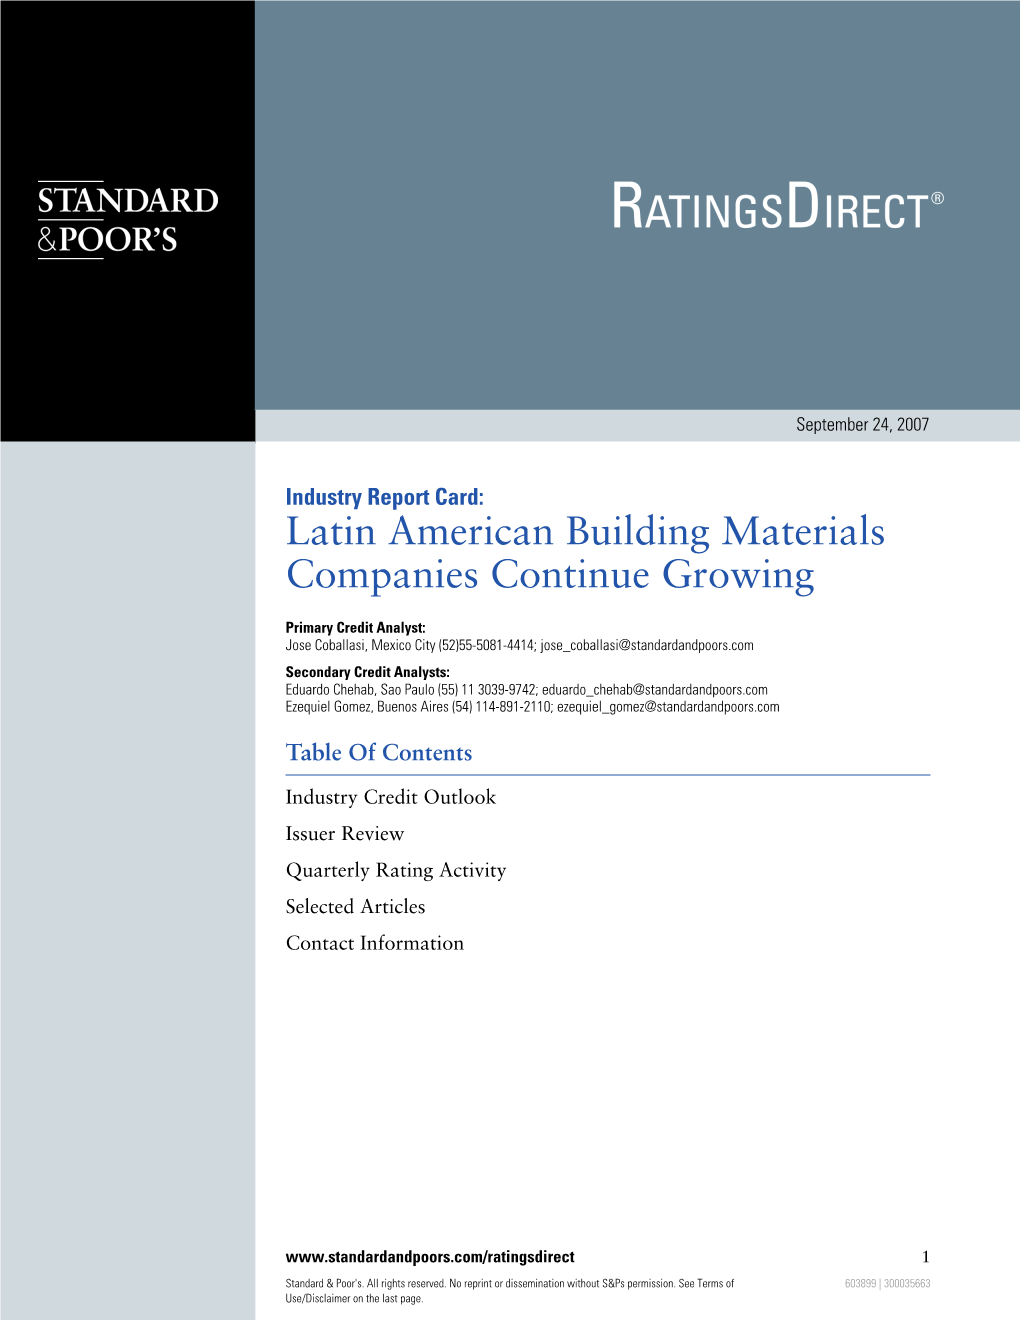 Latin American Building Materials Companies Continue Growing